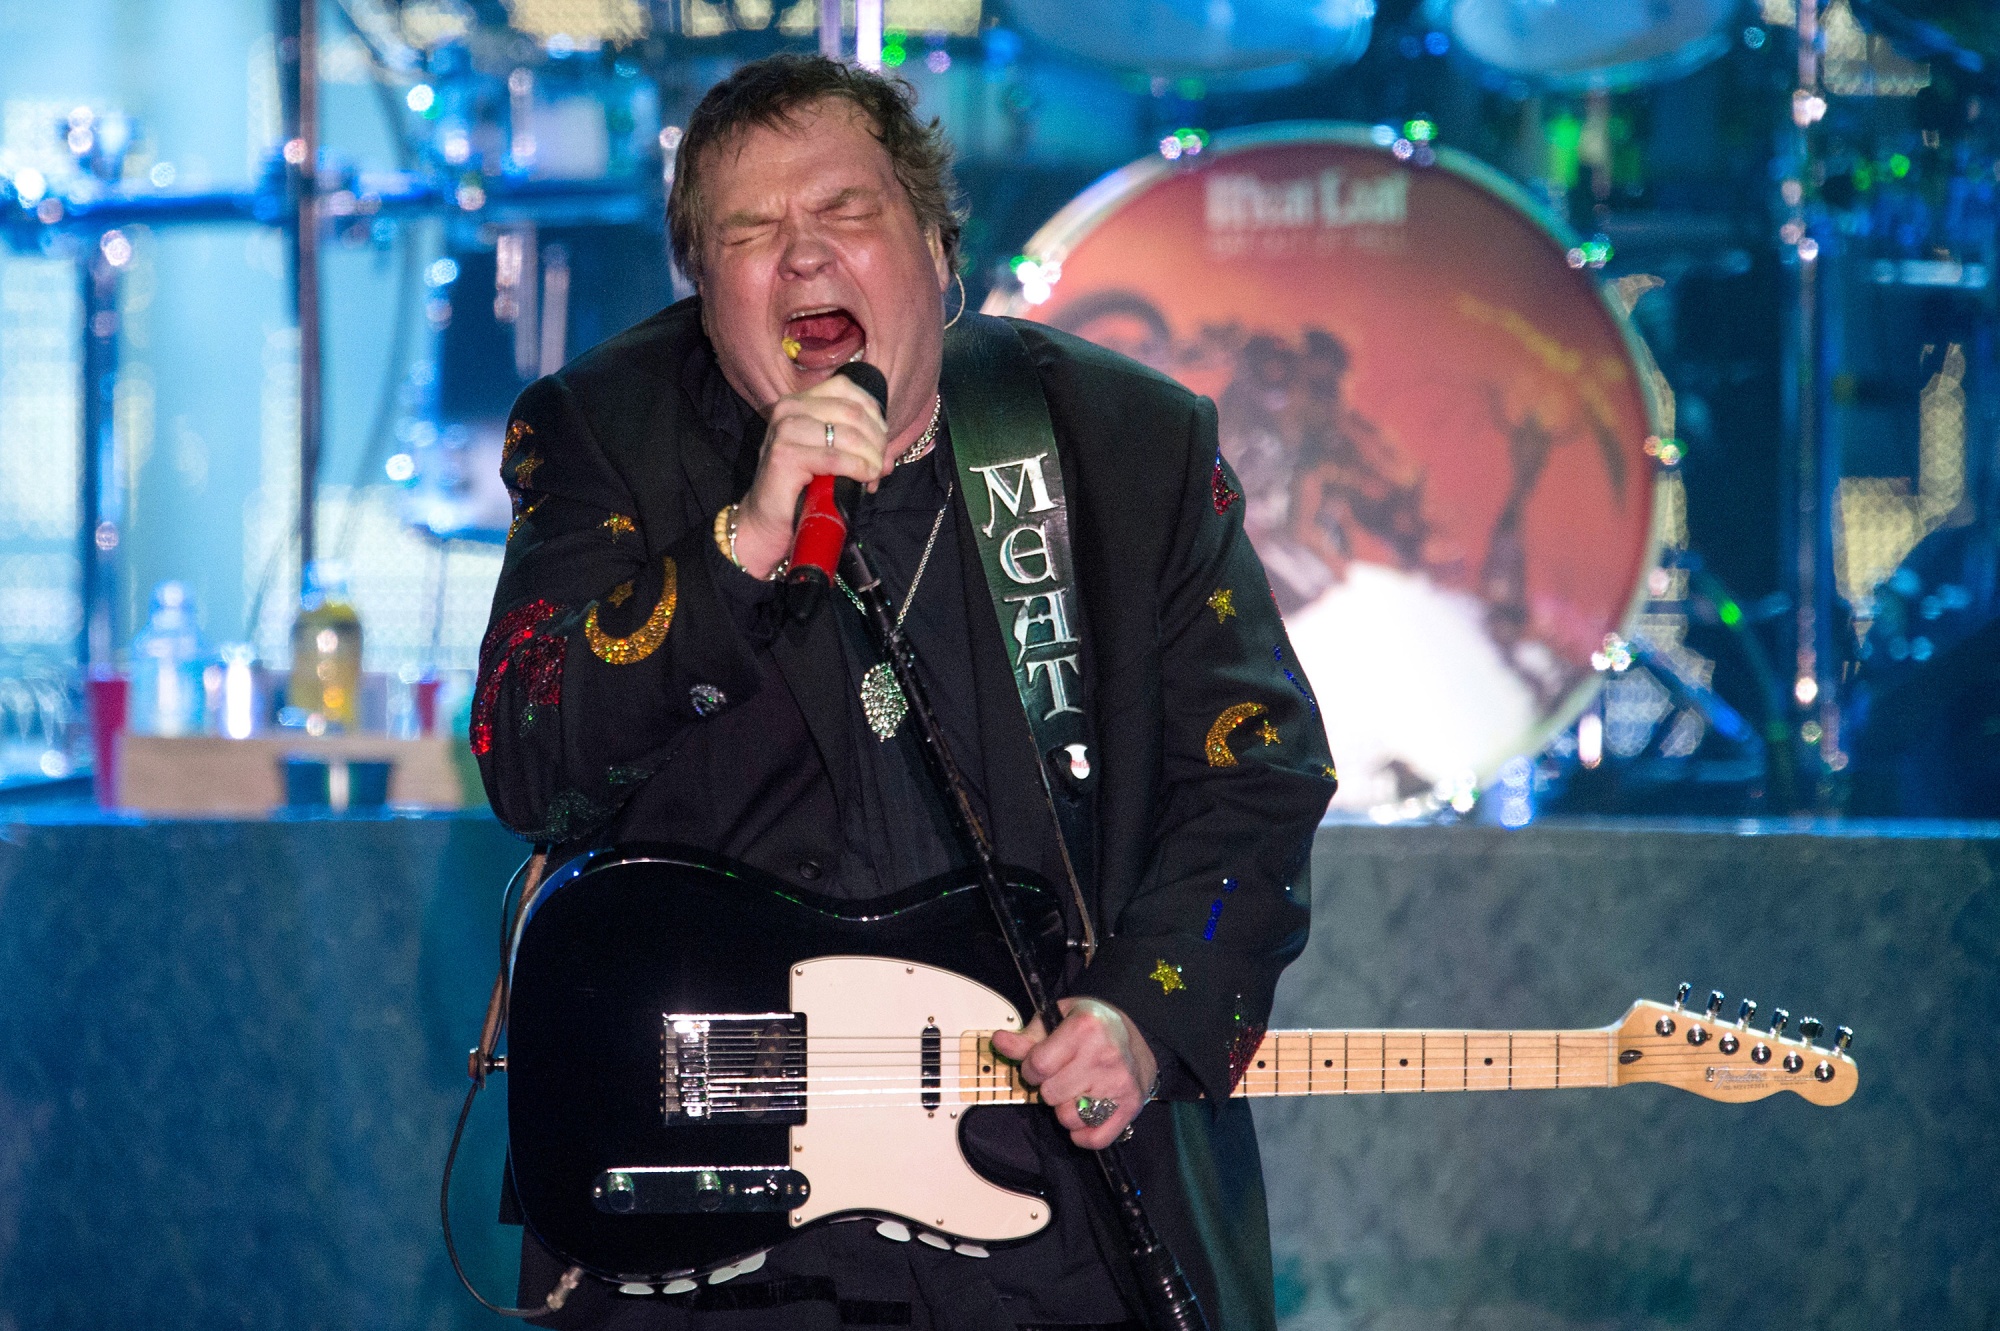 Meat Loaf Dies: 'Bat Out of Hell' Singer Passes Away at 74 - Bloomberg